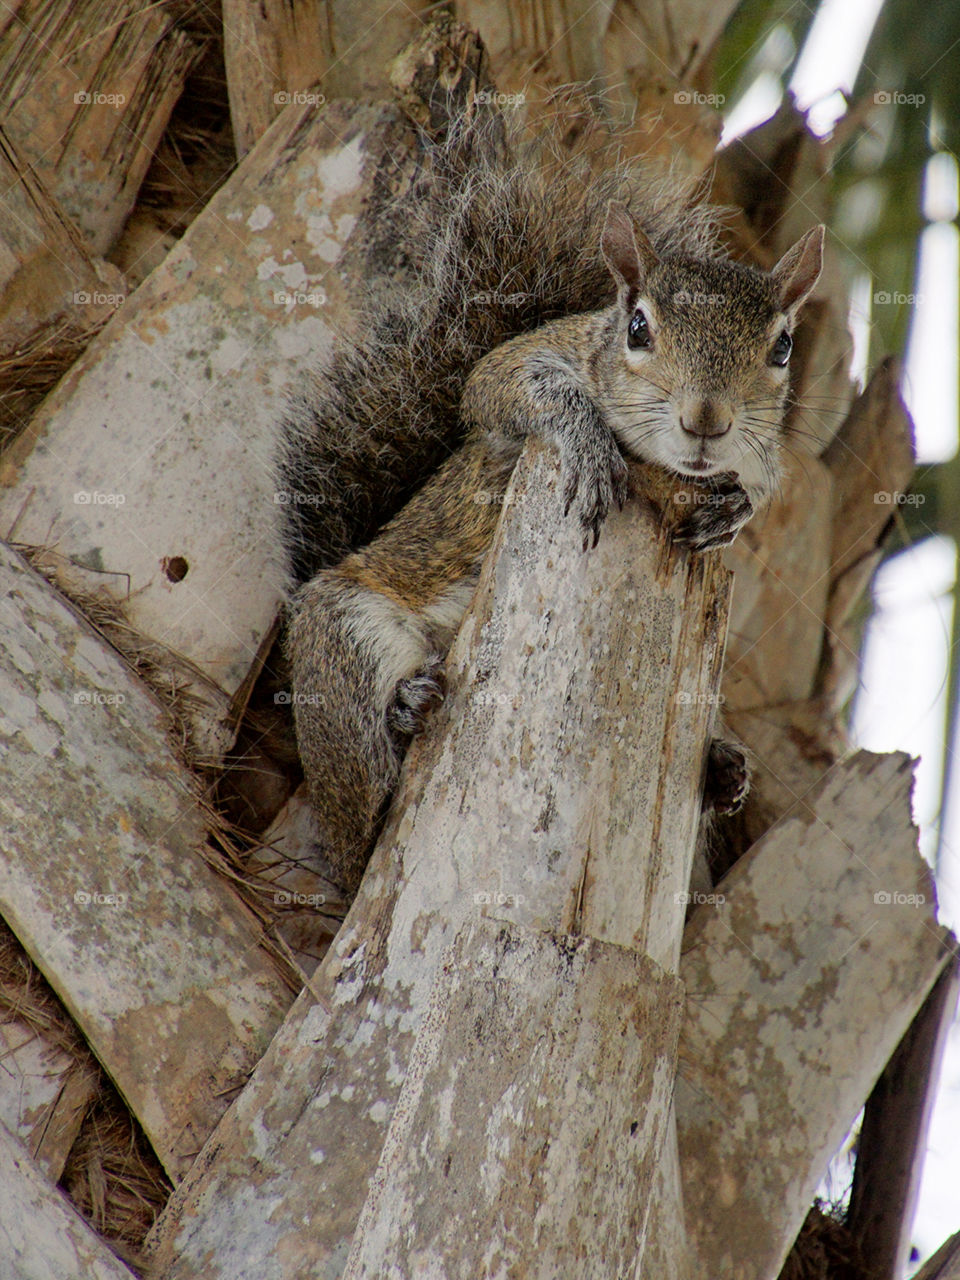 Squirrel on a Ledge. Grey Squirrel looking over ledge of Cabbage Palm tree